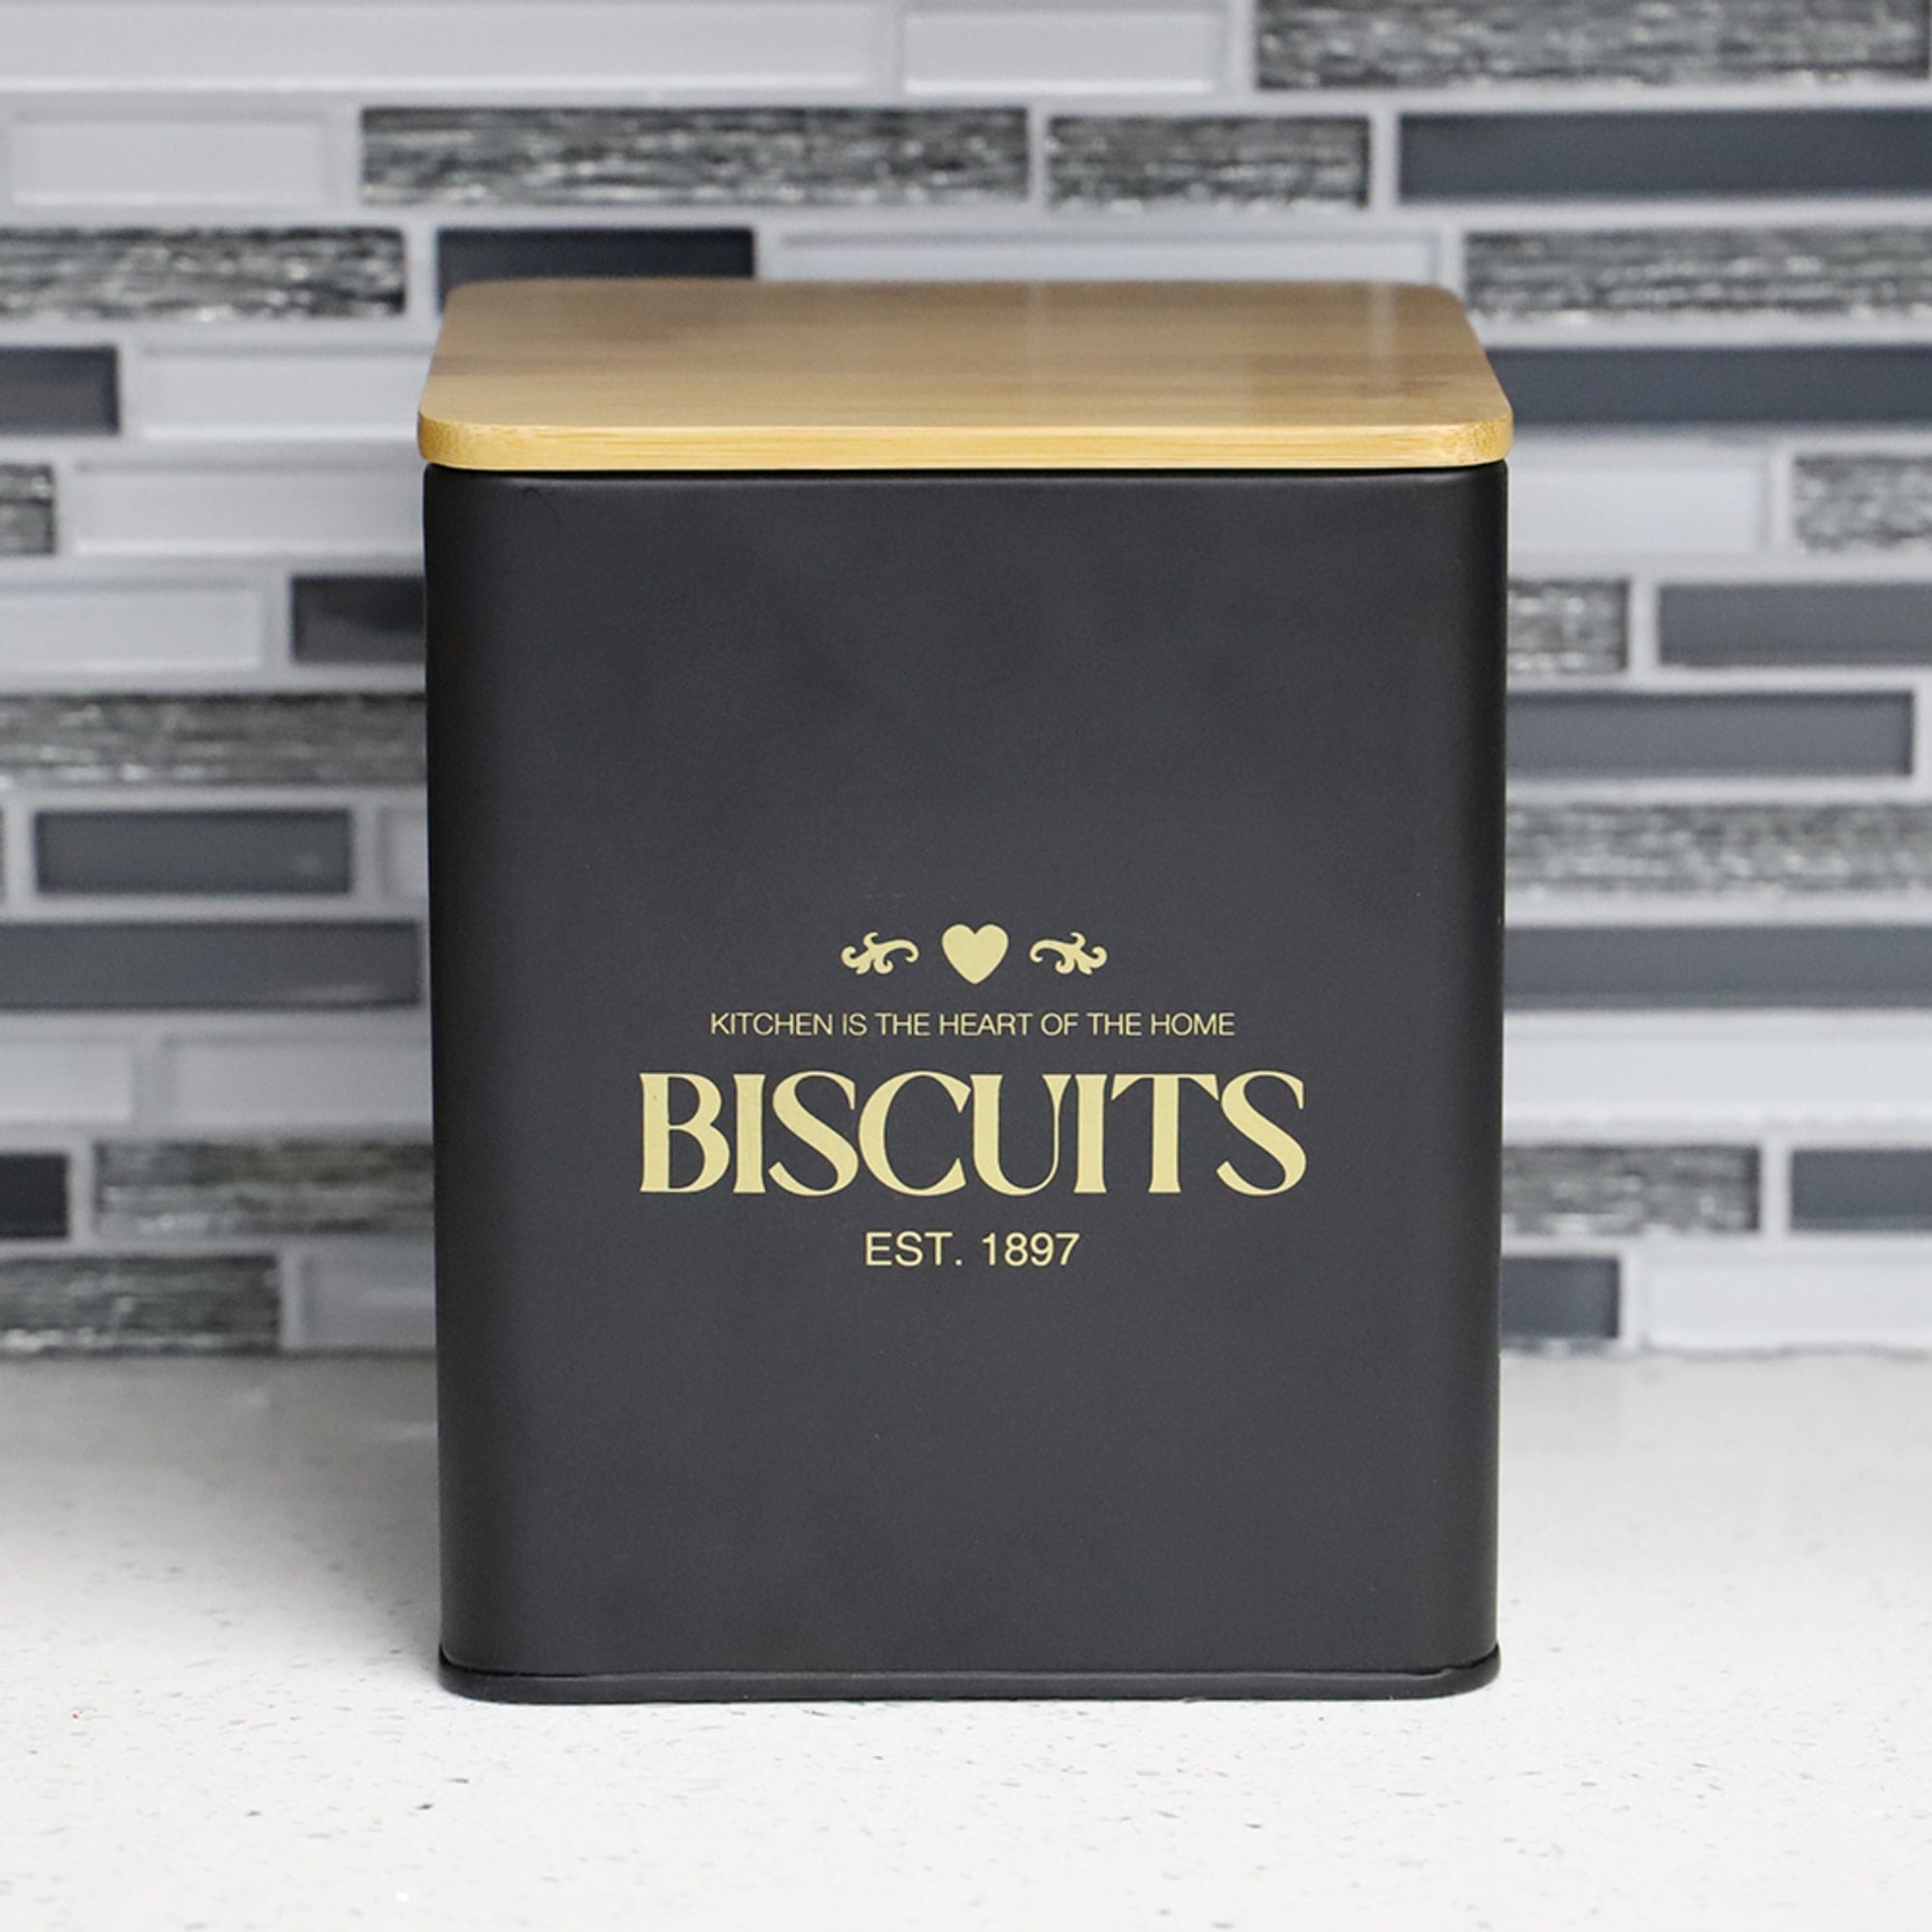 Home Basics Bistro 60 oz. Tin Biscuit Canister with Bamboo Lid, Black $7.00 EACH, CASE PACK OF 12